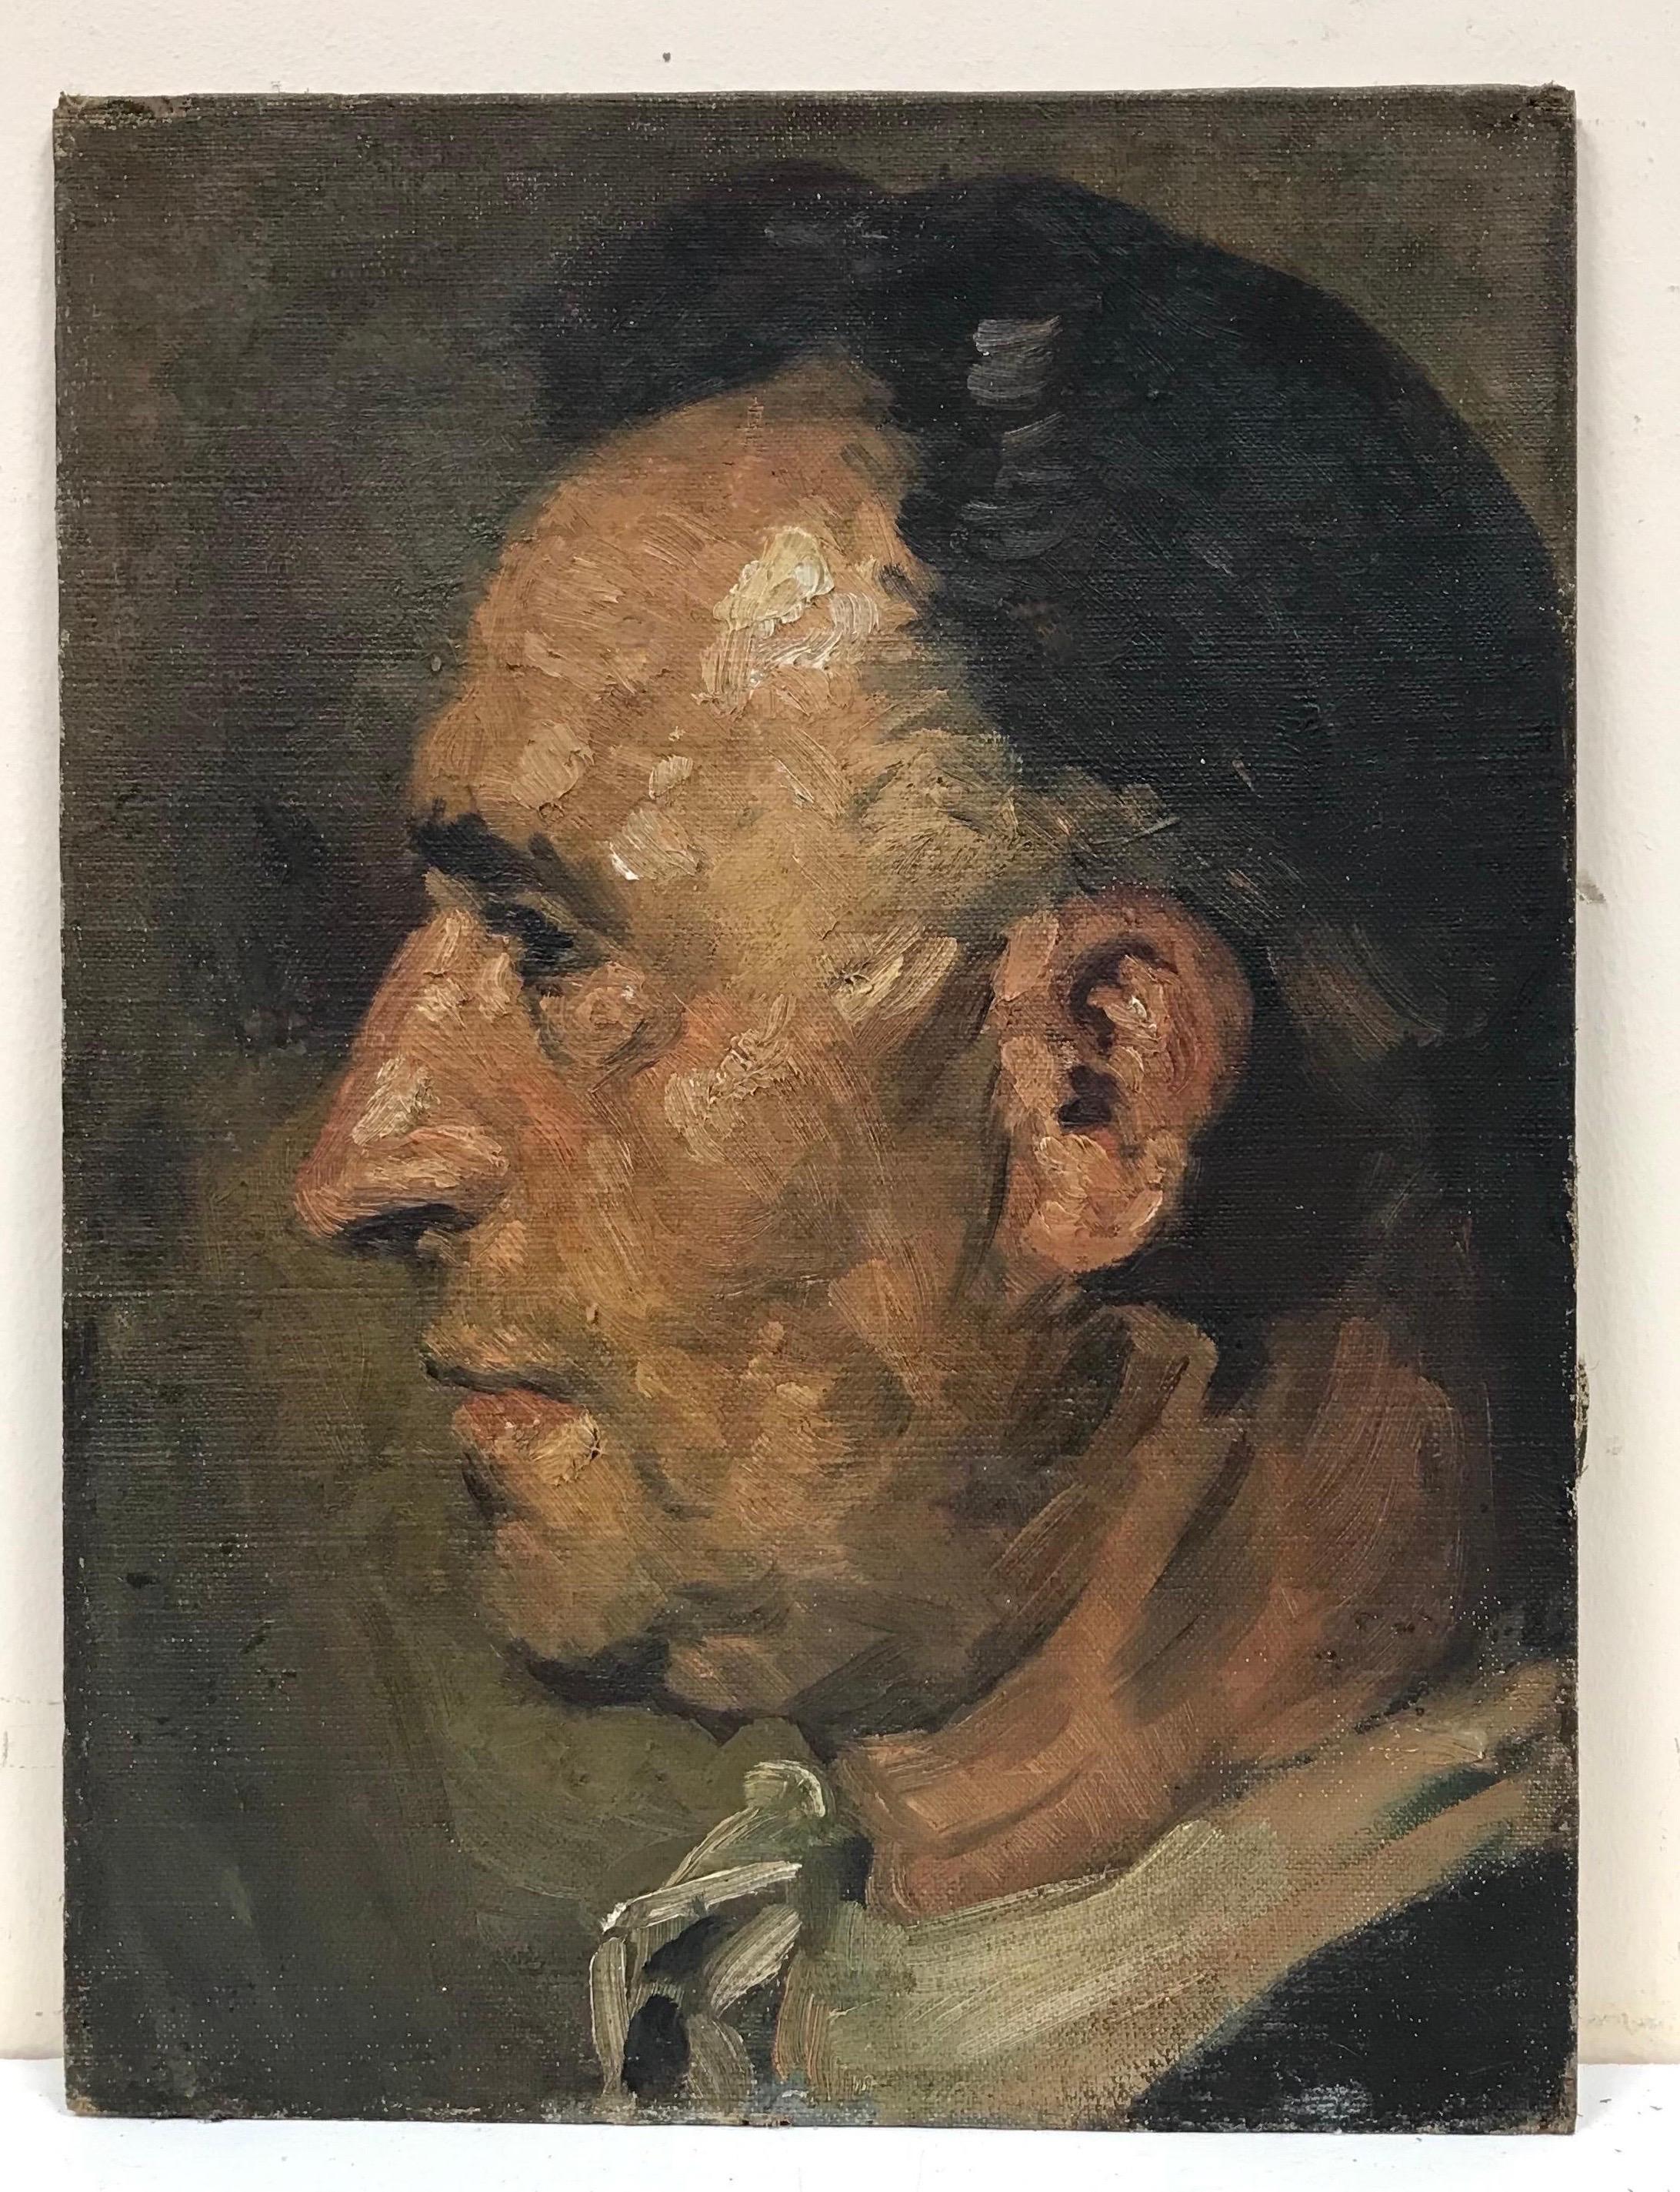 Superb French Impressionist Oil, Profile Portrait of Mans Head, c. 1900 - Painting by French c. 1900's